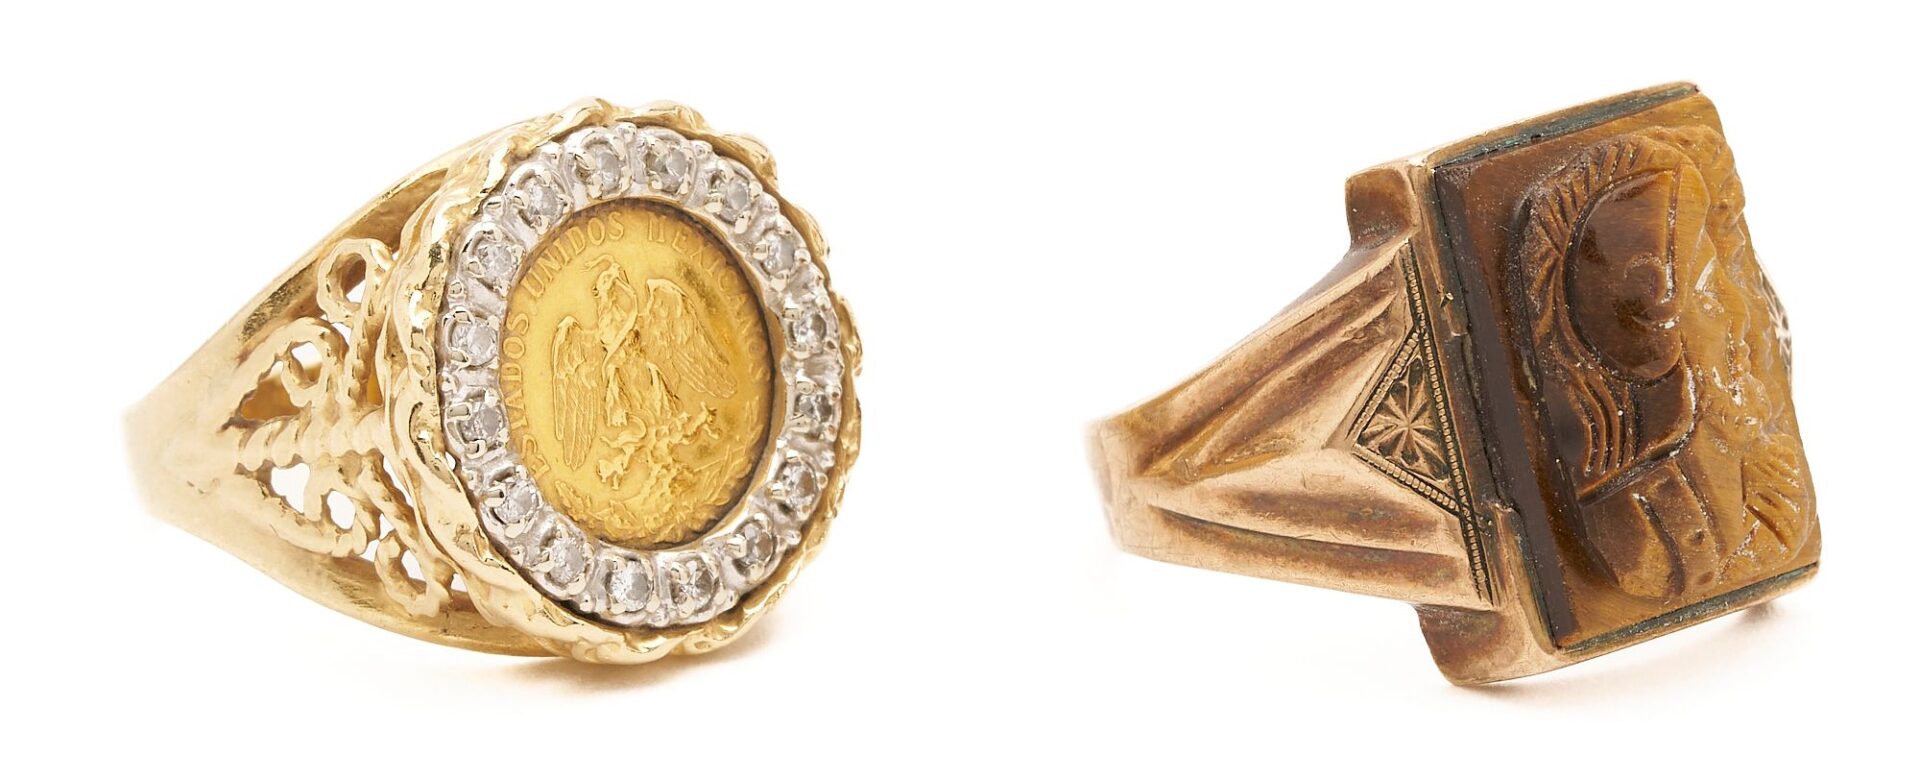 Lot 851: 14K Gold, Diamond, & Mexican two Peso piece Ring & 10K Gold & Tiger-eye Carved Cameo Ring